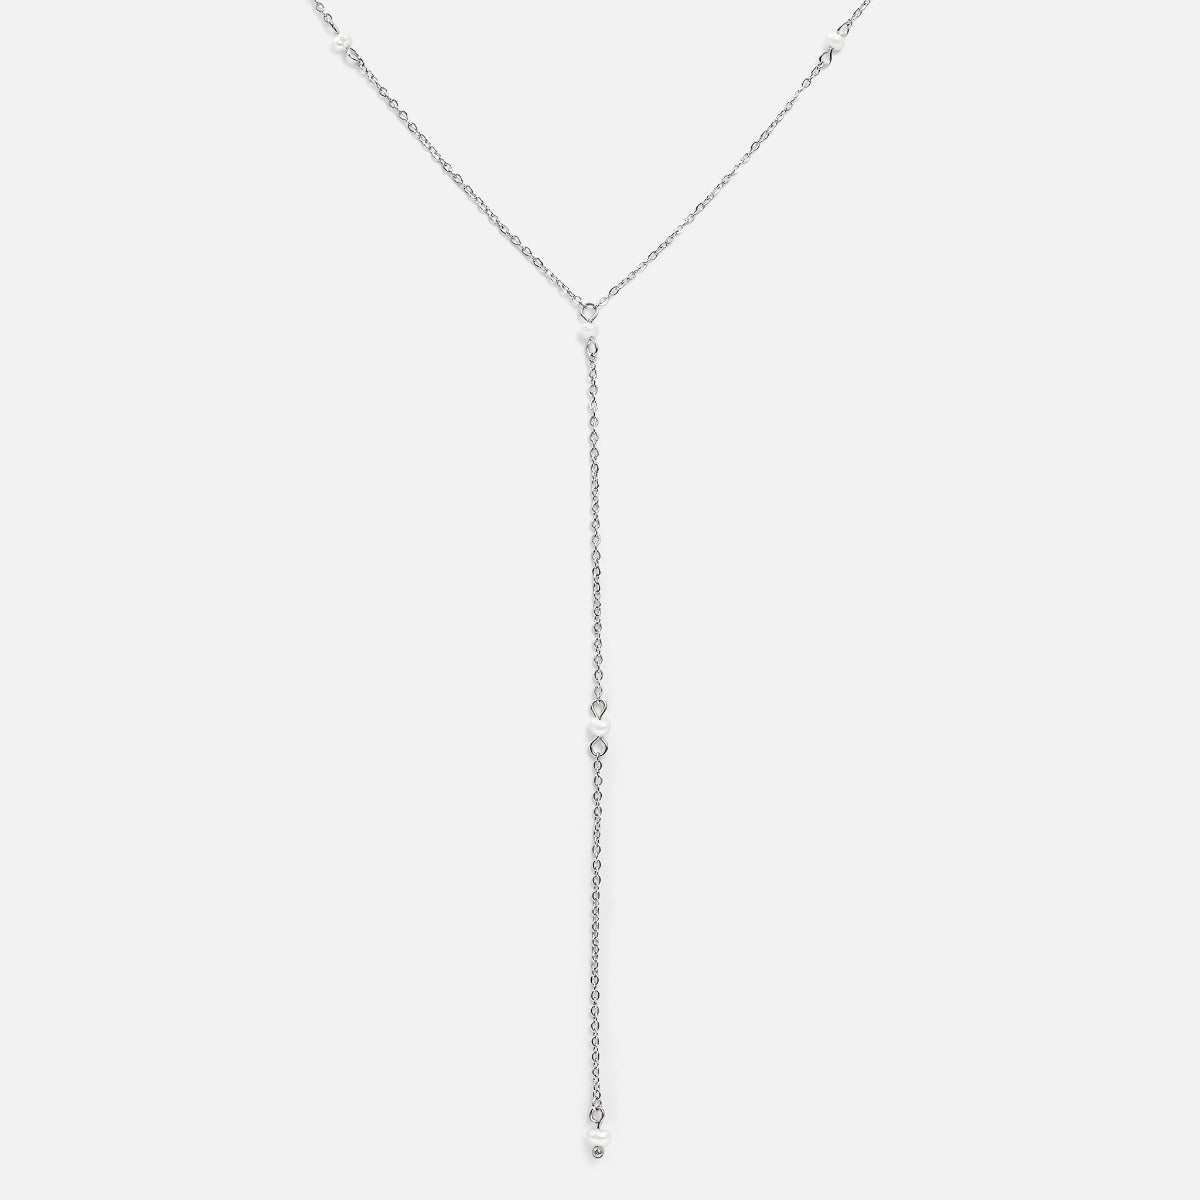 Silvered necklace with pearls insertions and long pendant